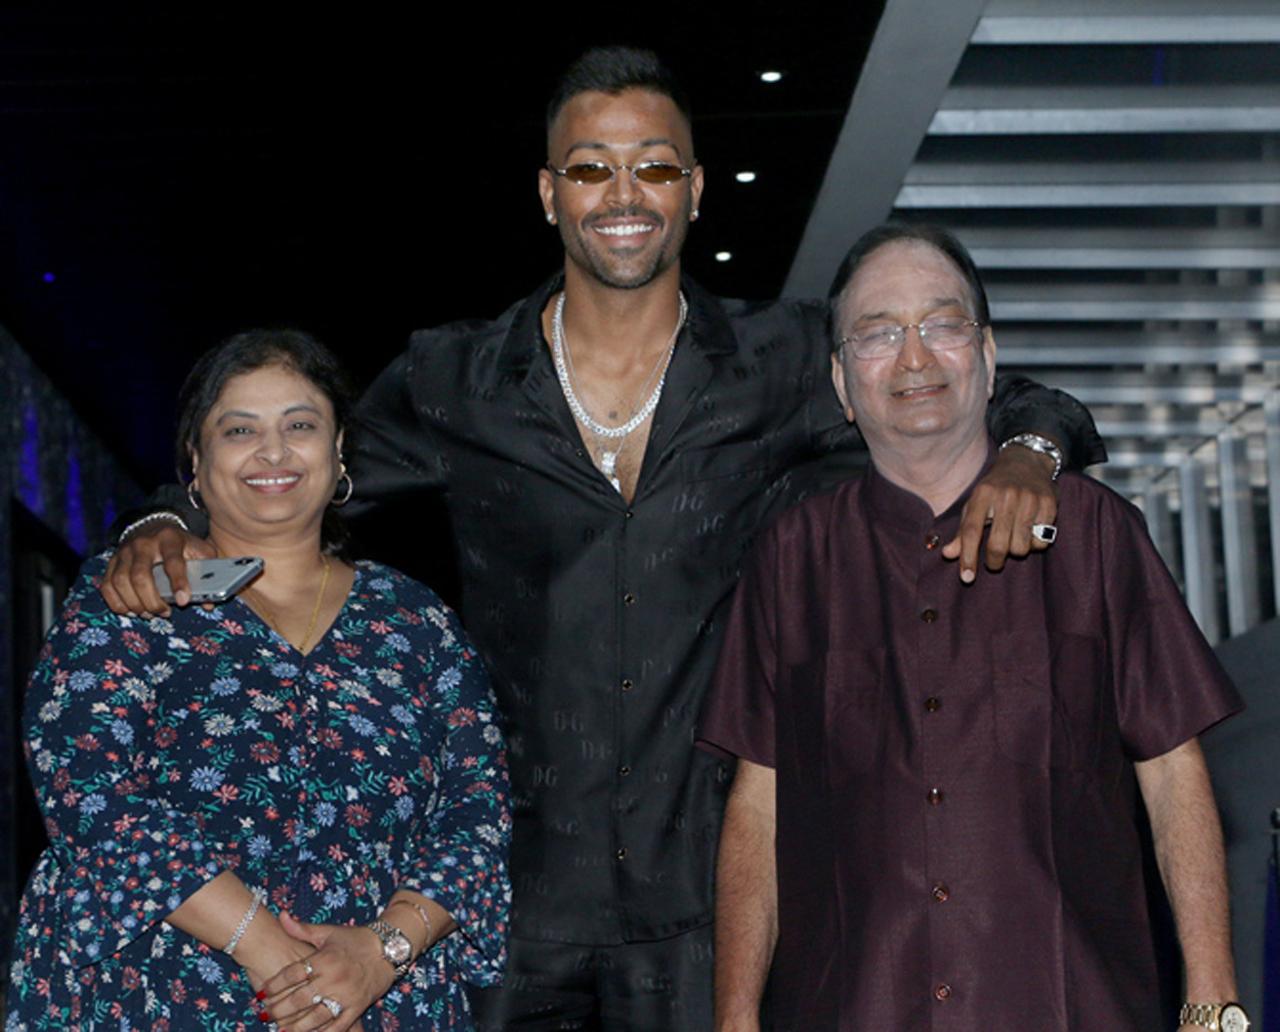 Hardik Pandya and Krunal Pandya's late father, Himanshu Pandya, first ran a small car finance business in Surat. The family then shifted to Baroda in order to facilitate his sons with better cricket training facilities during their growing up years. In pic - Hardik Pandya with his parents